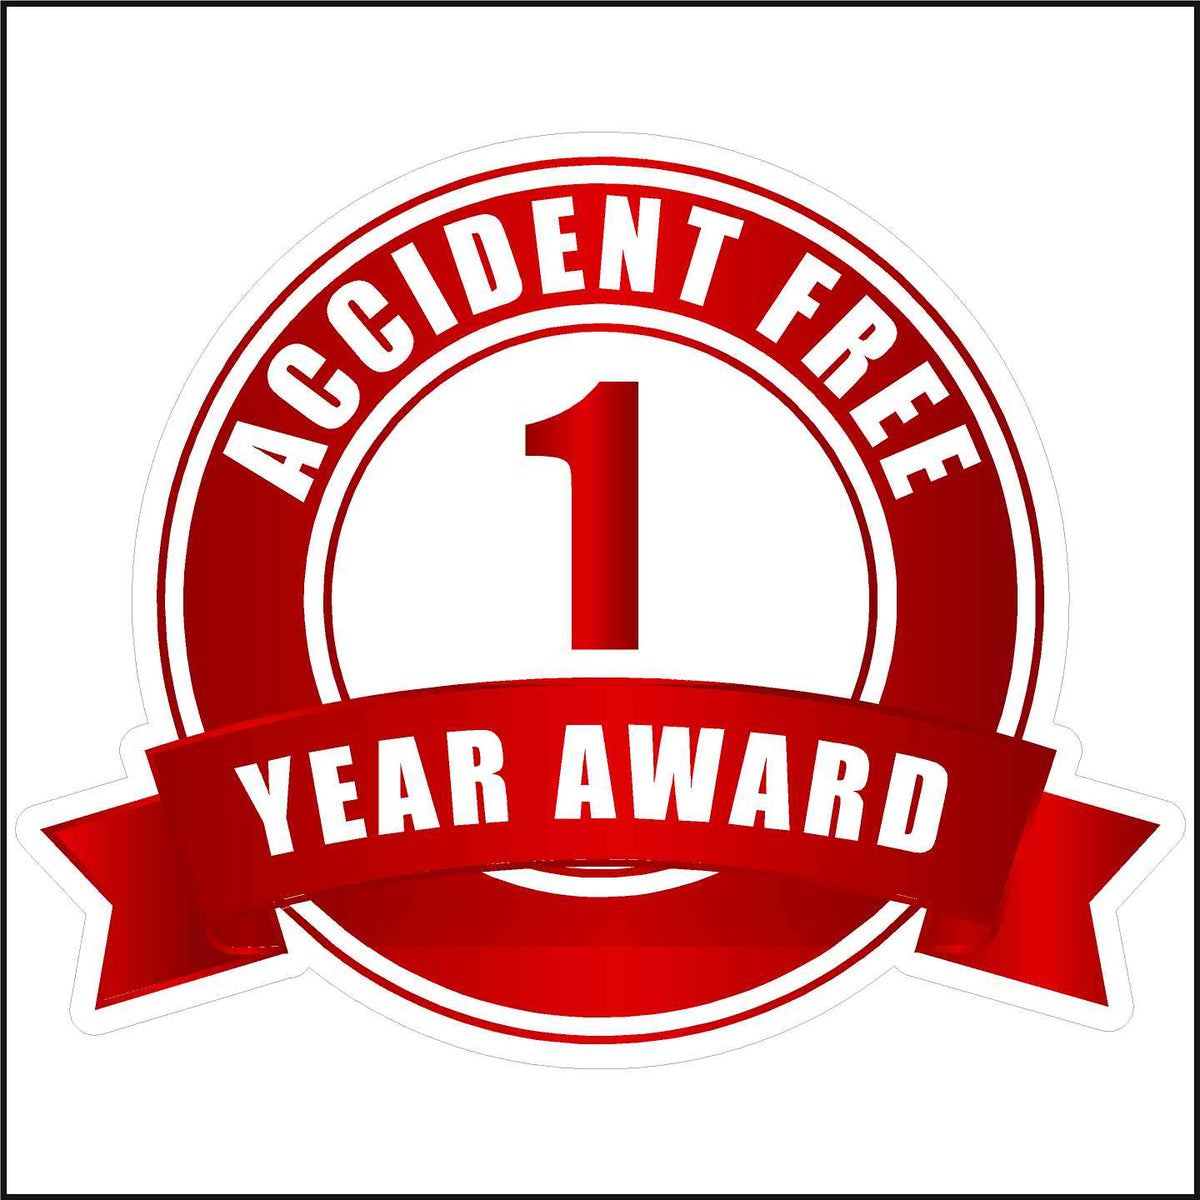 accident free one year award sticker printed in red and white.